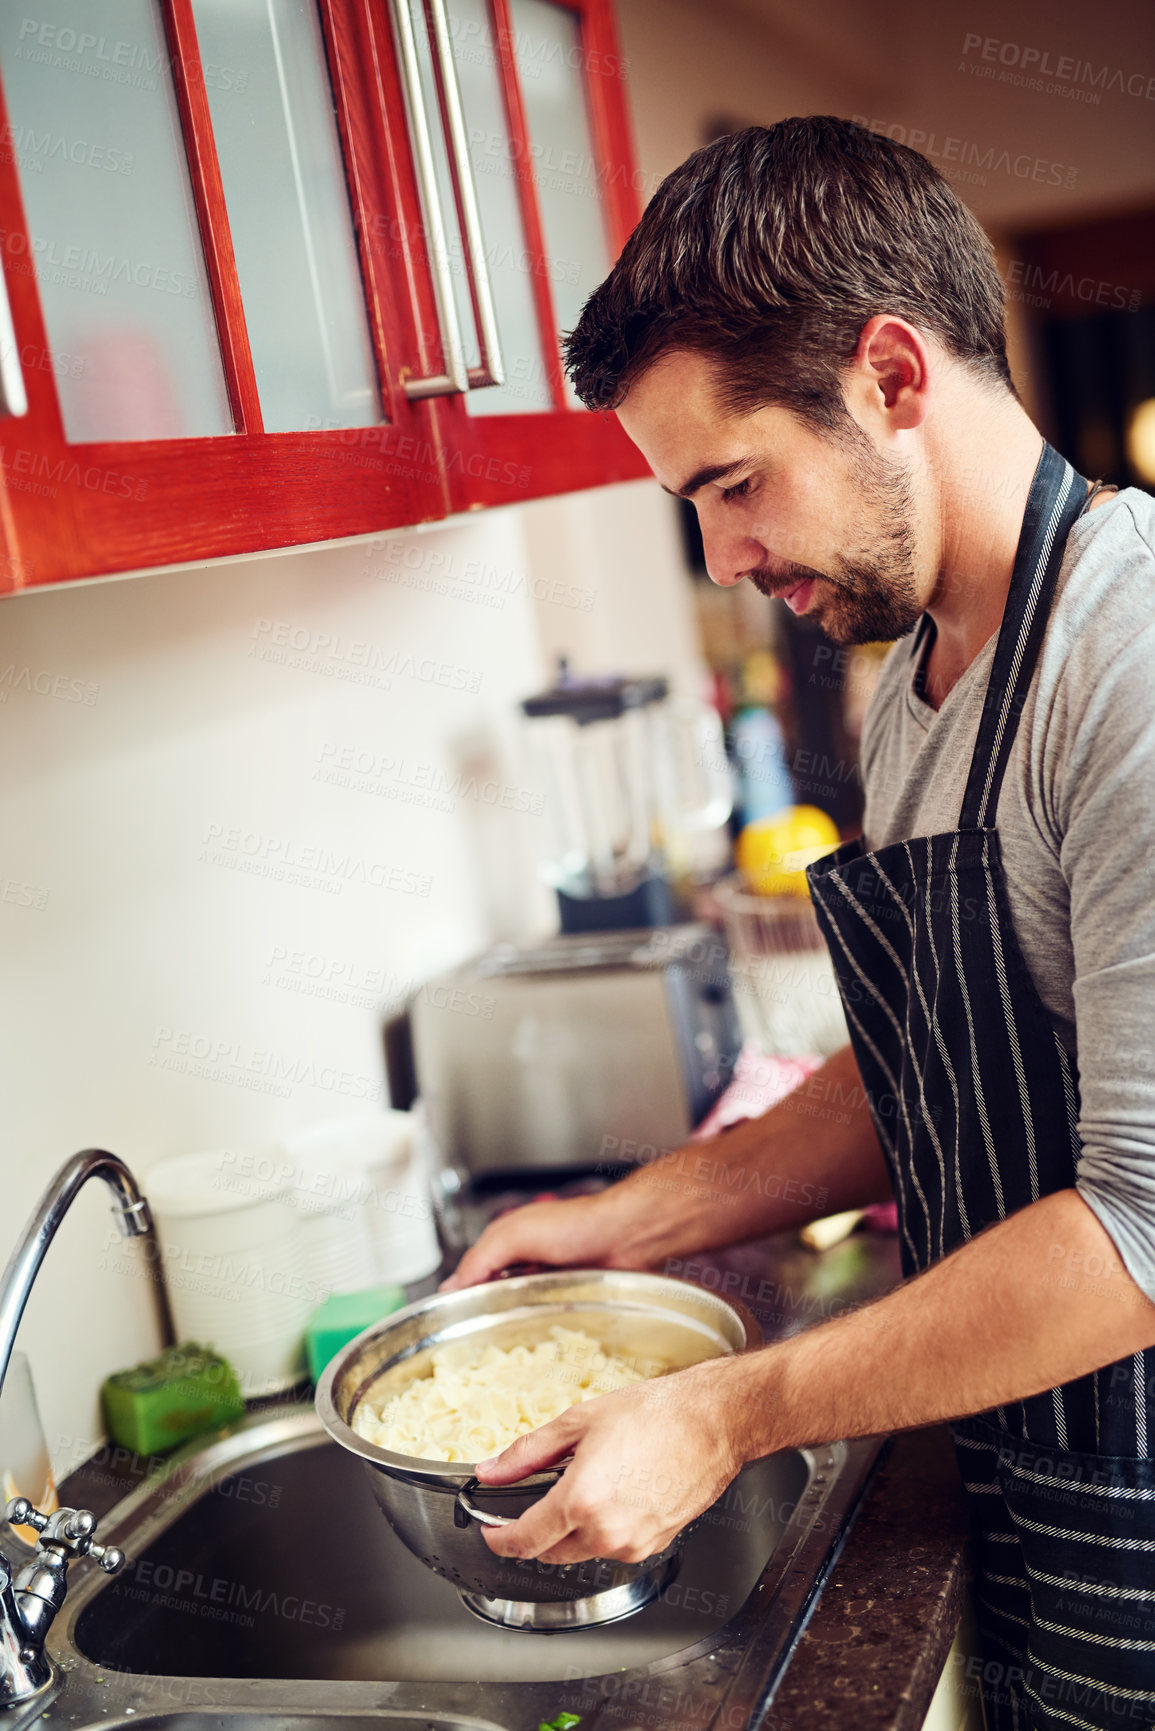 Buy stock photo Shot of a young man rinsing pasta at home